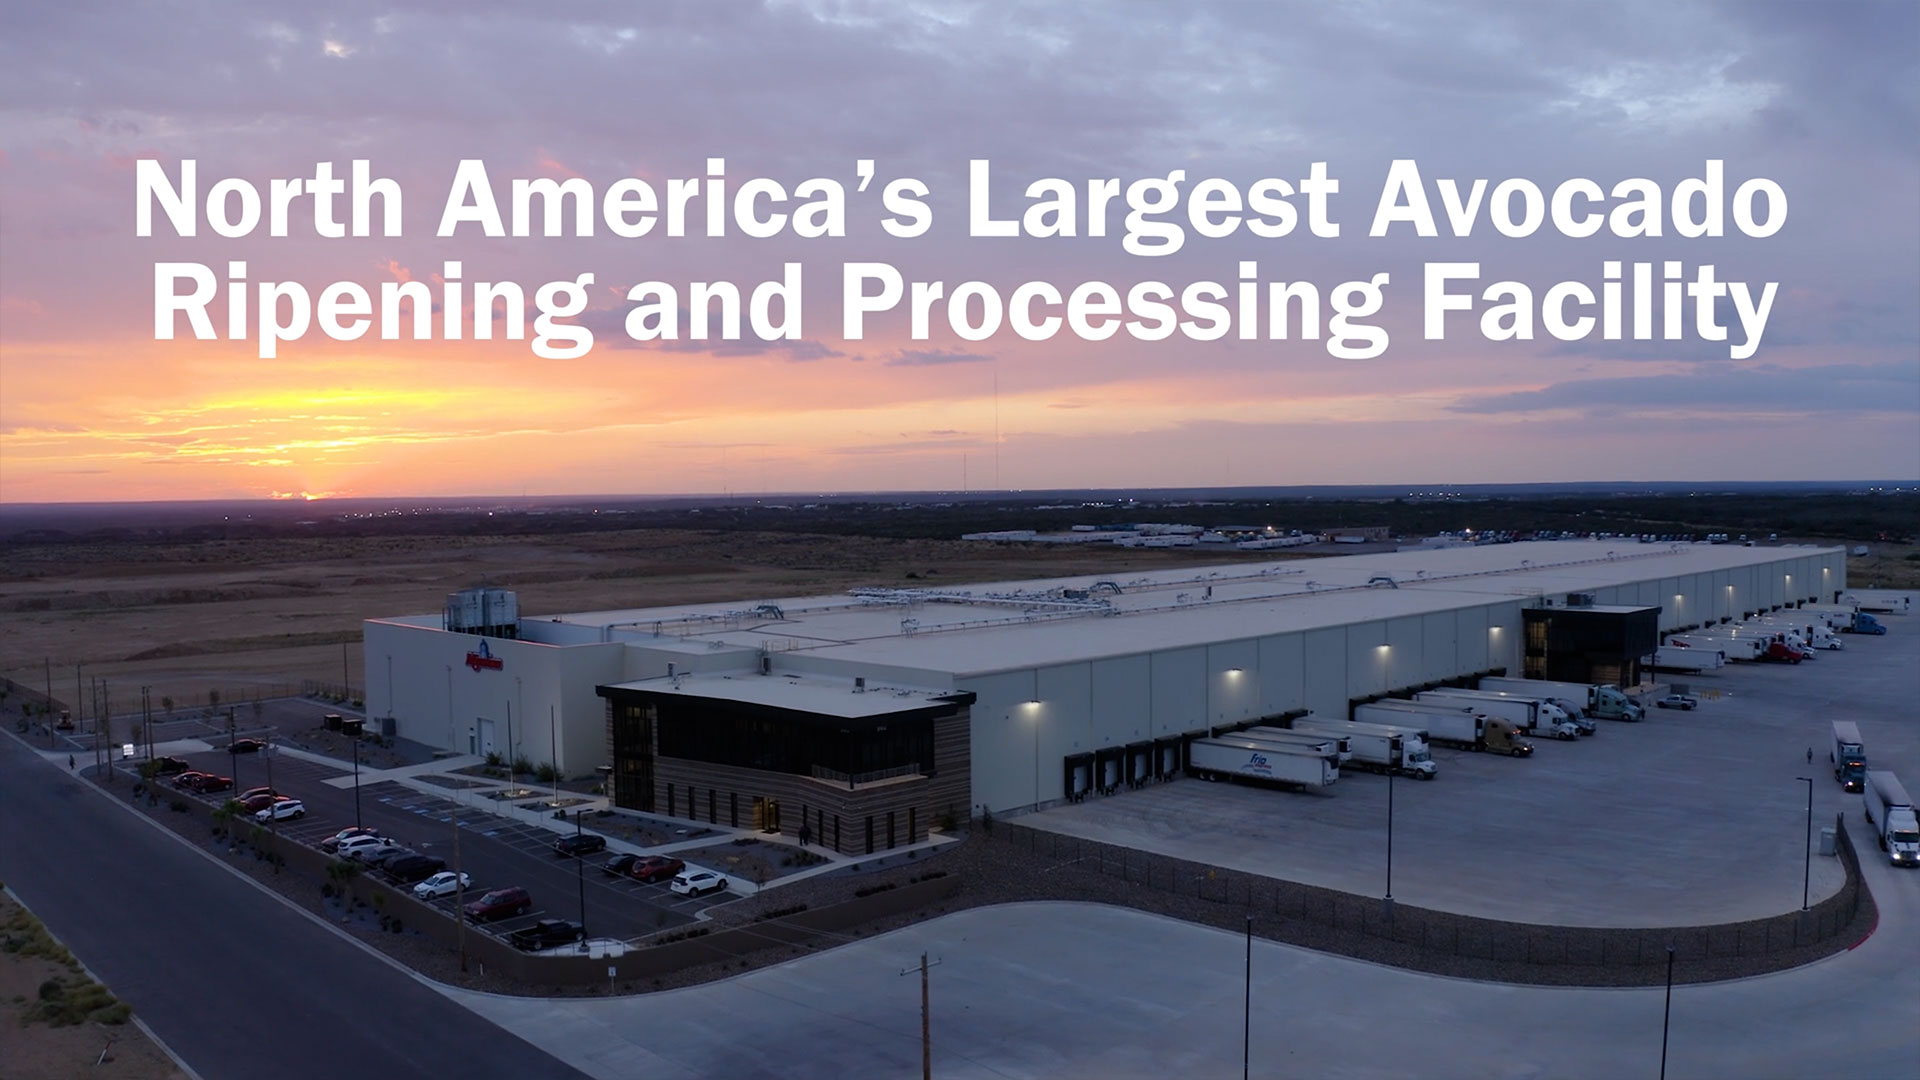 North America’s Largest Avocado Facility – A M King